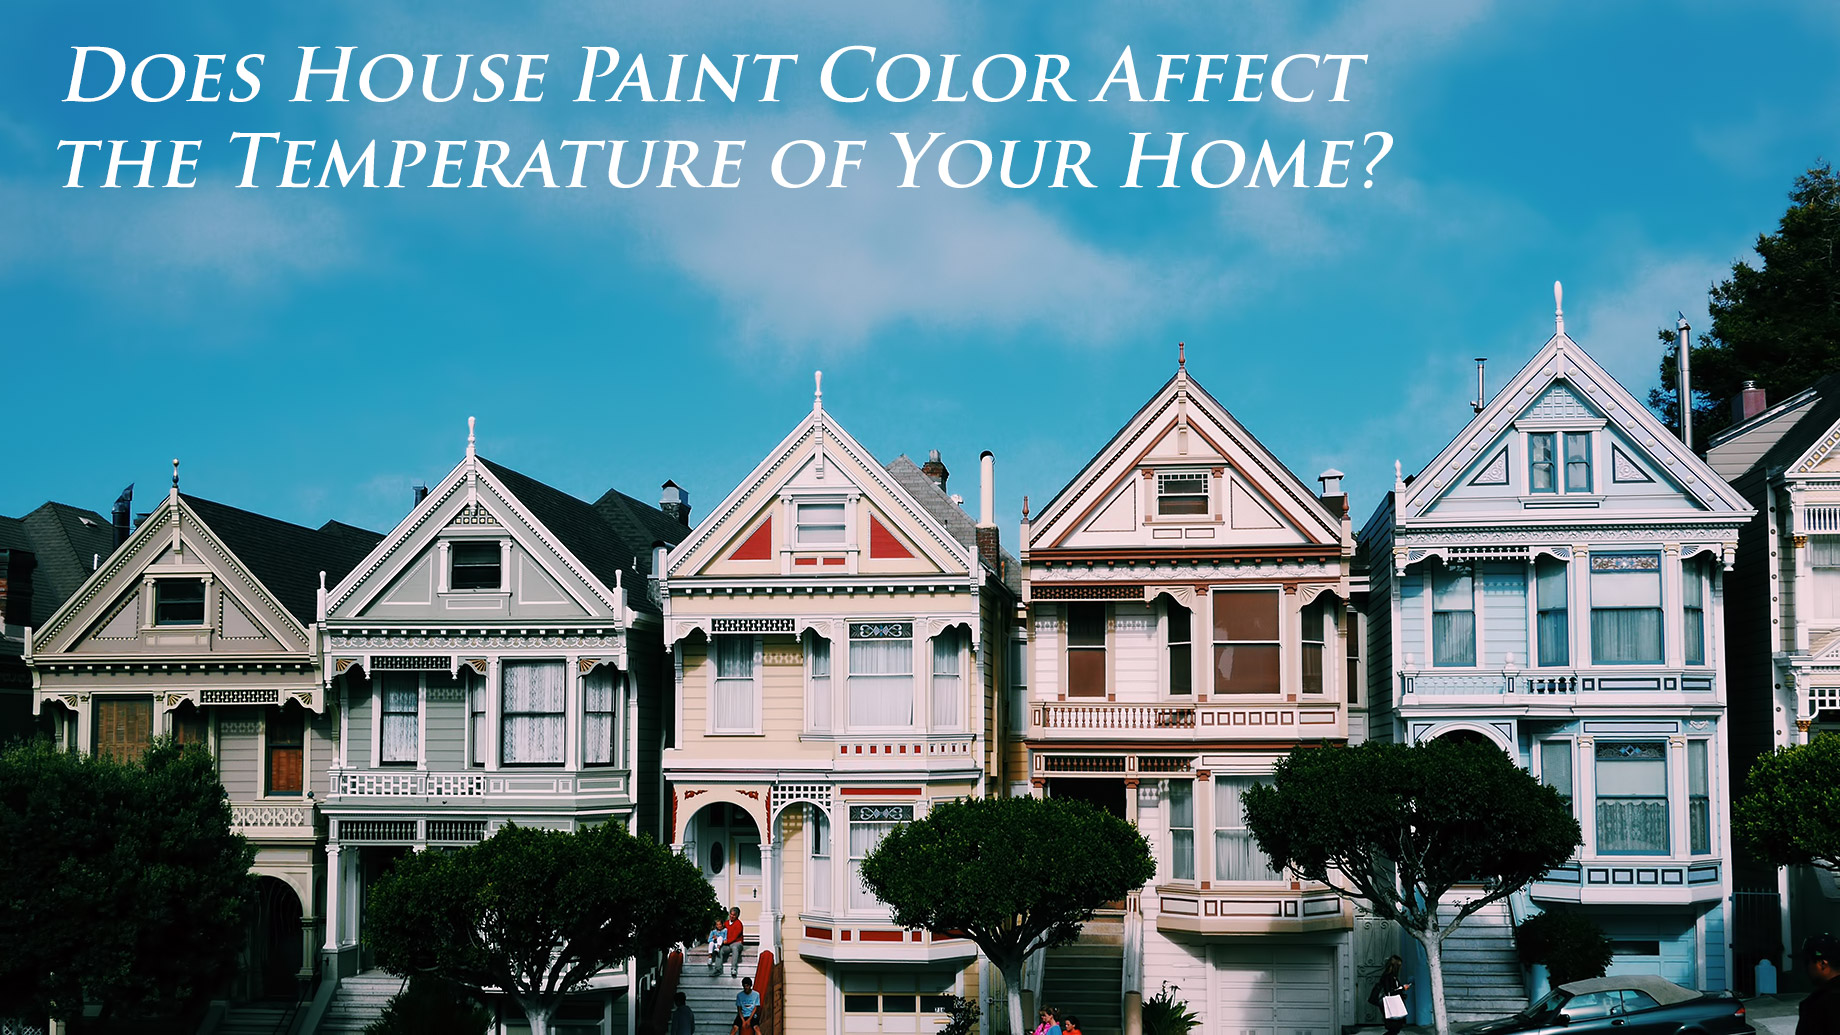 Does House Paint Color Affect the Temperature of Your Home? Here Are the Facts!